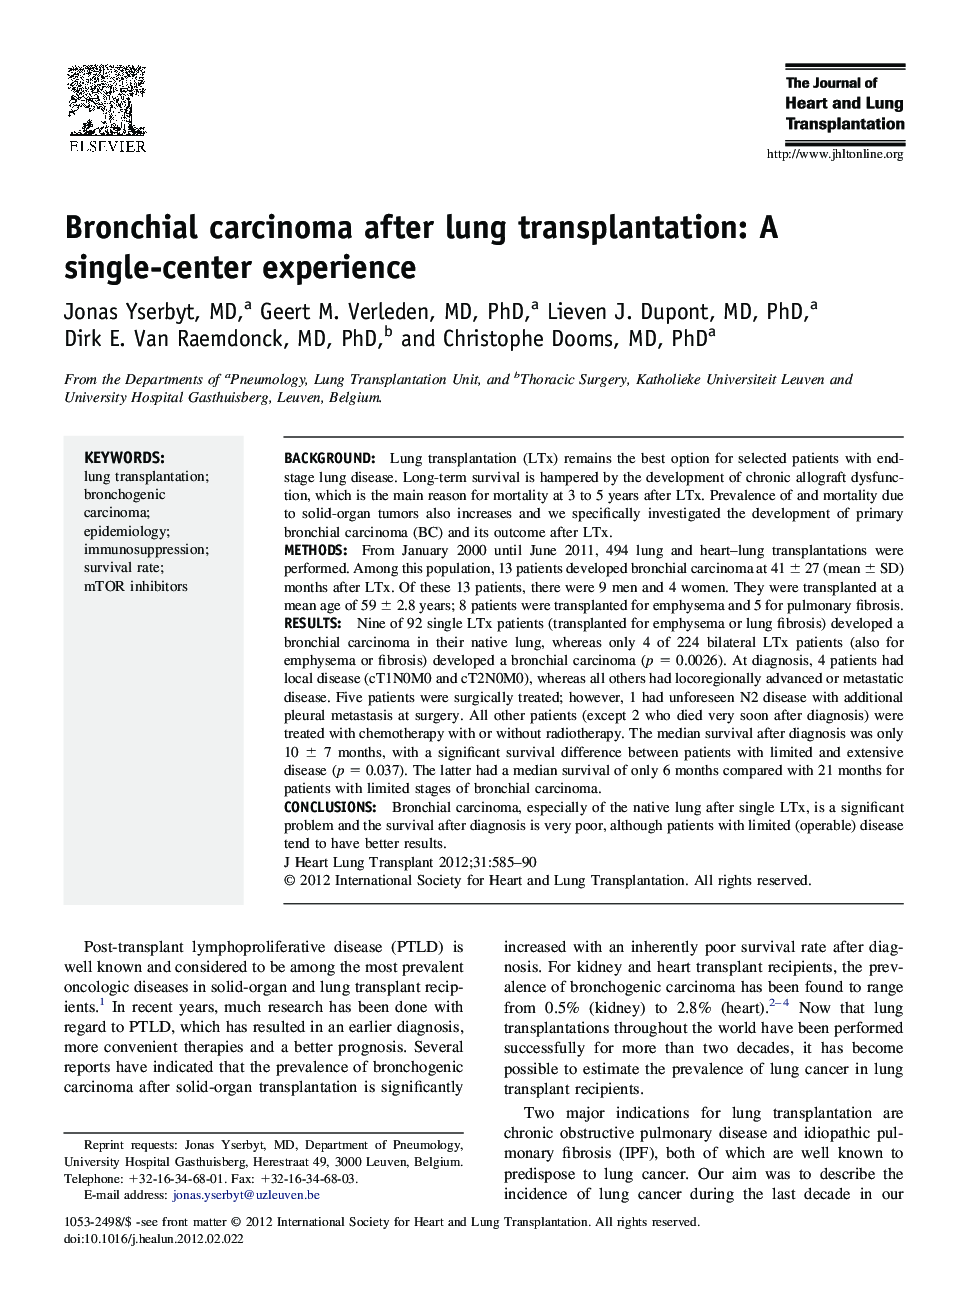 Bronchial carcinoma after lung transplantation: A single-center experience